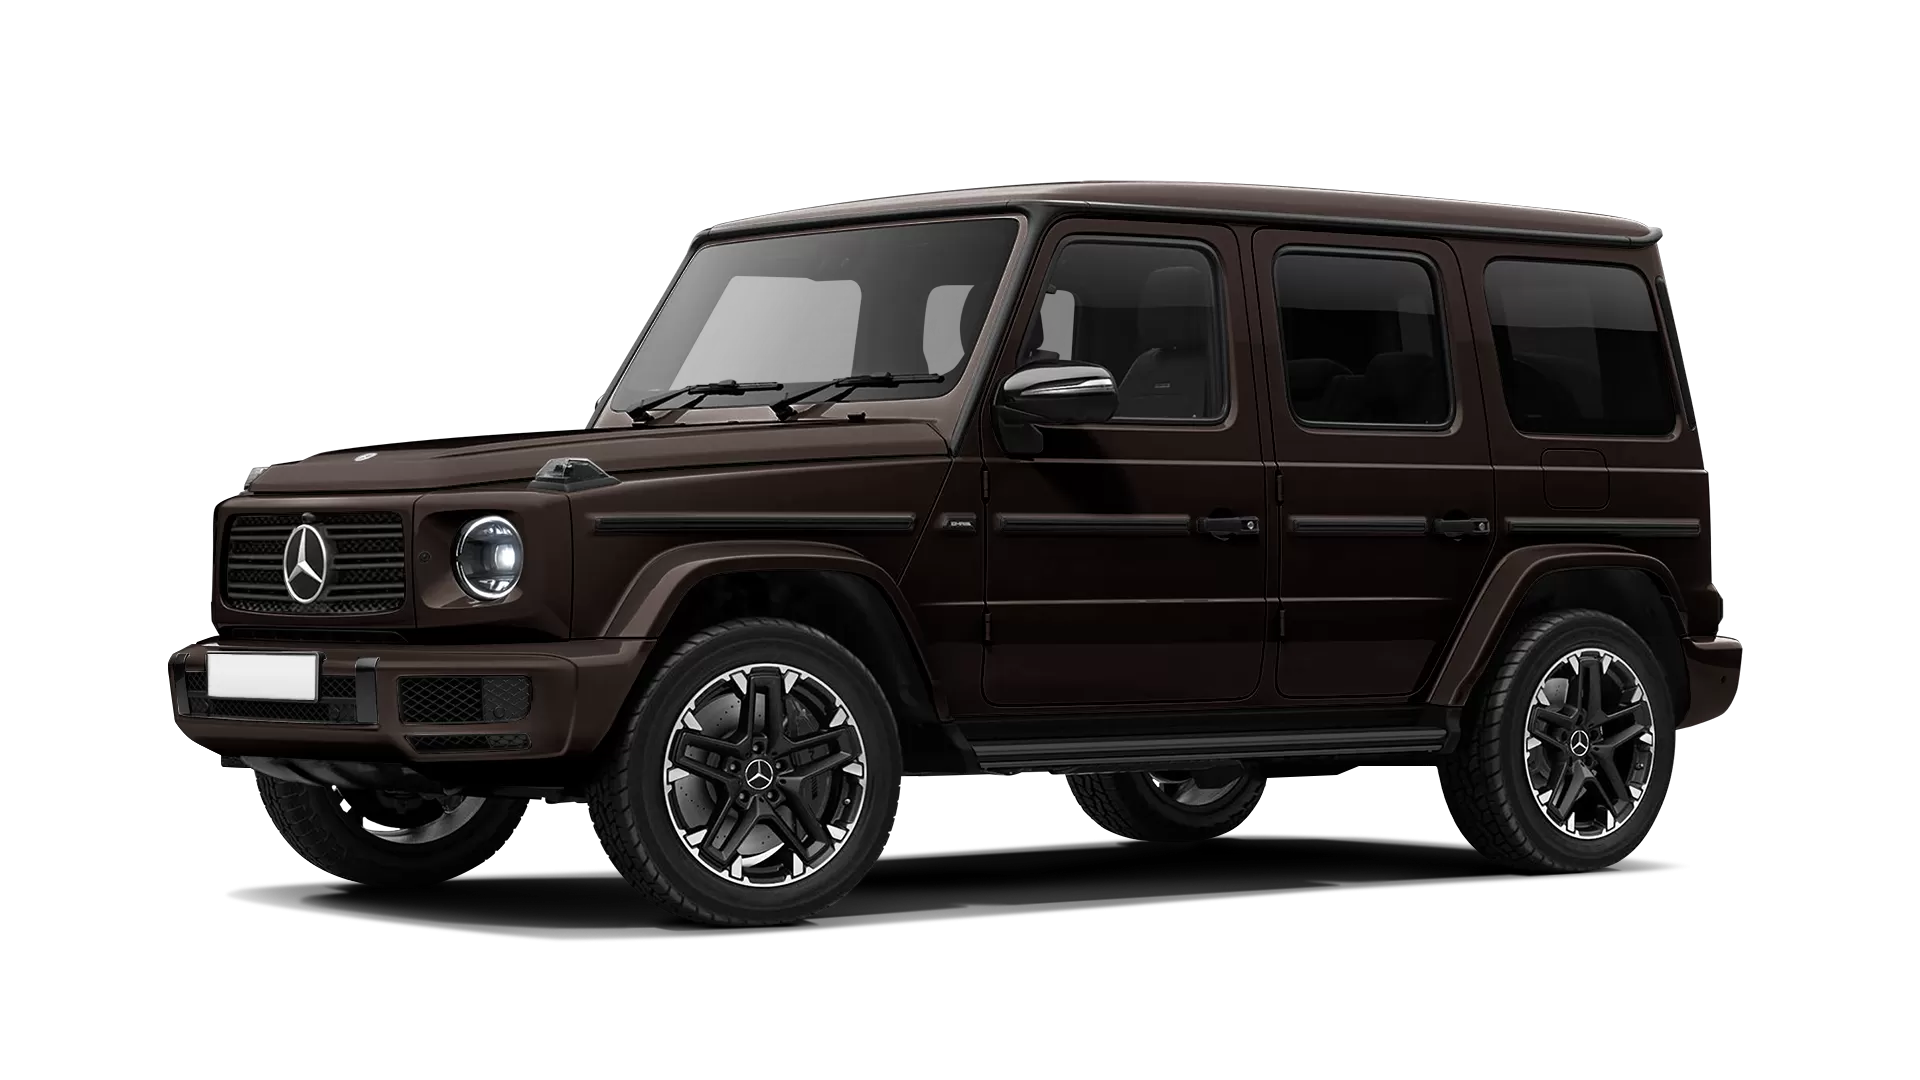 Mercedes G class W463 stock front view in Citrine Brown color